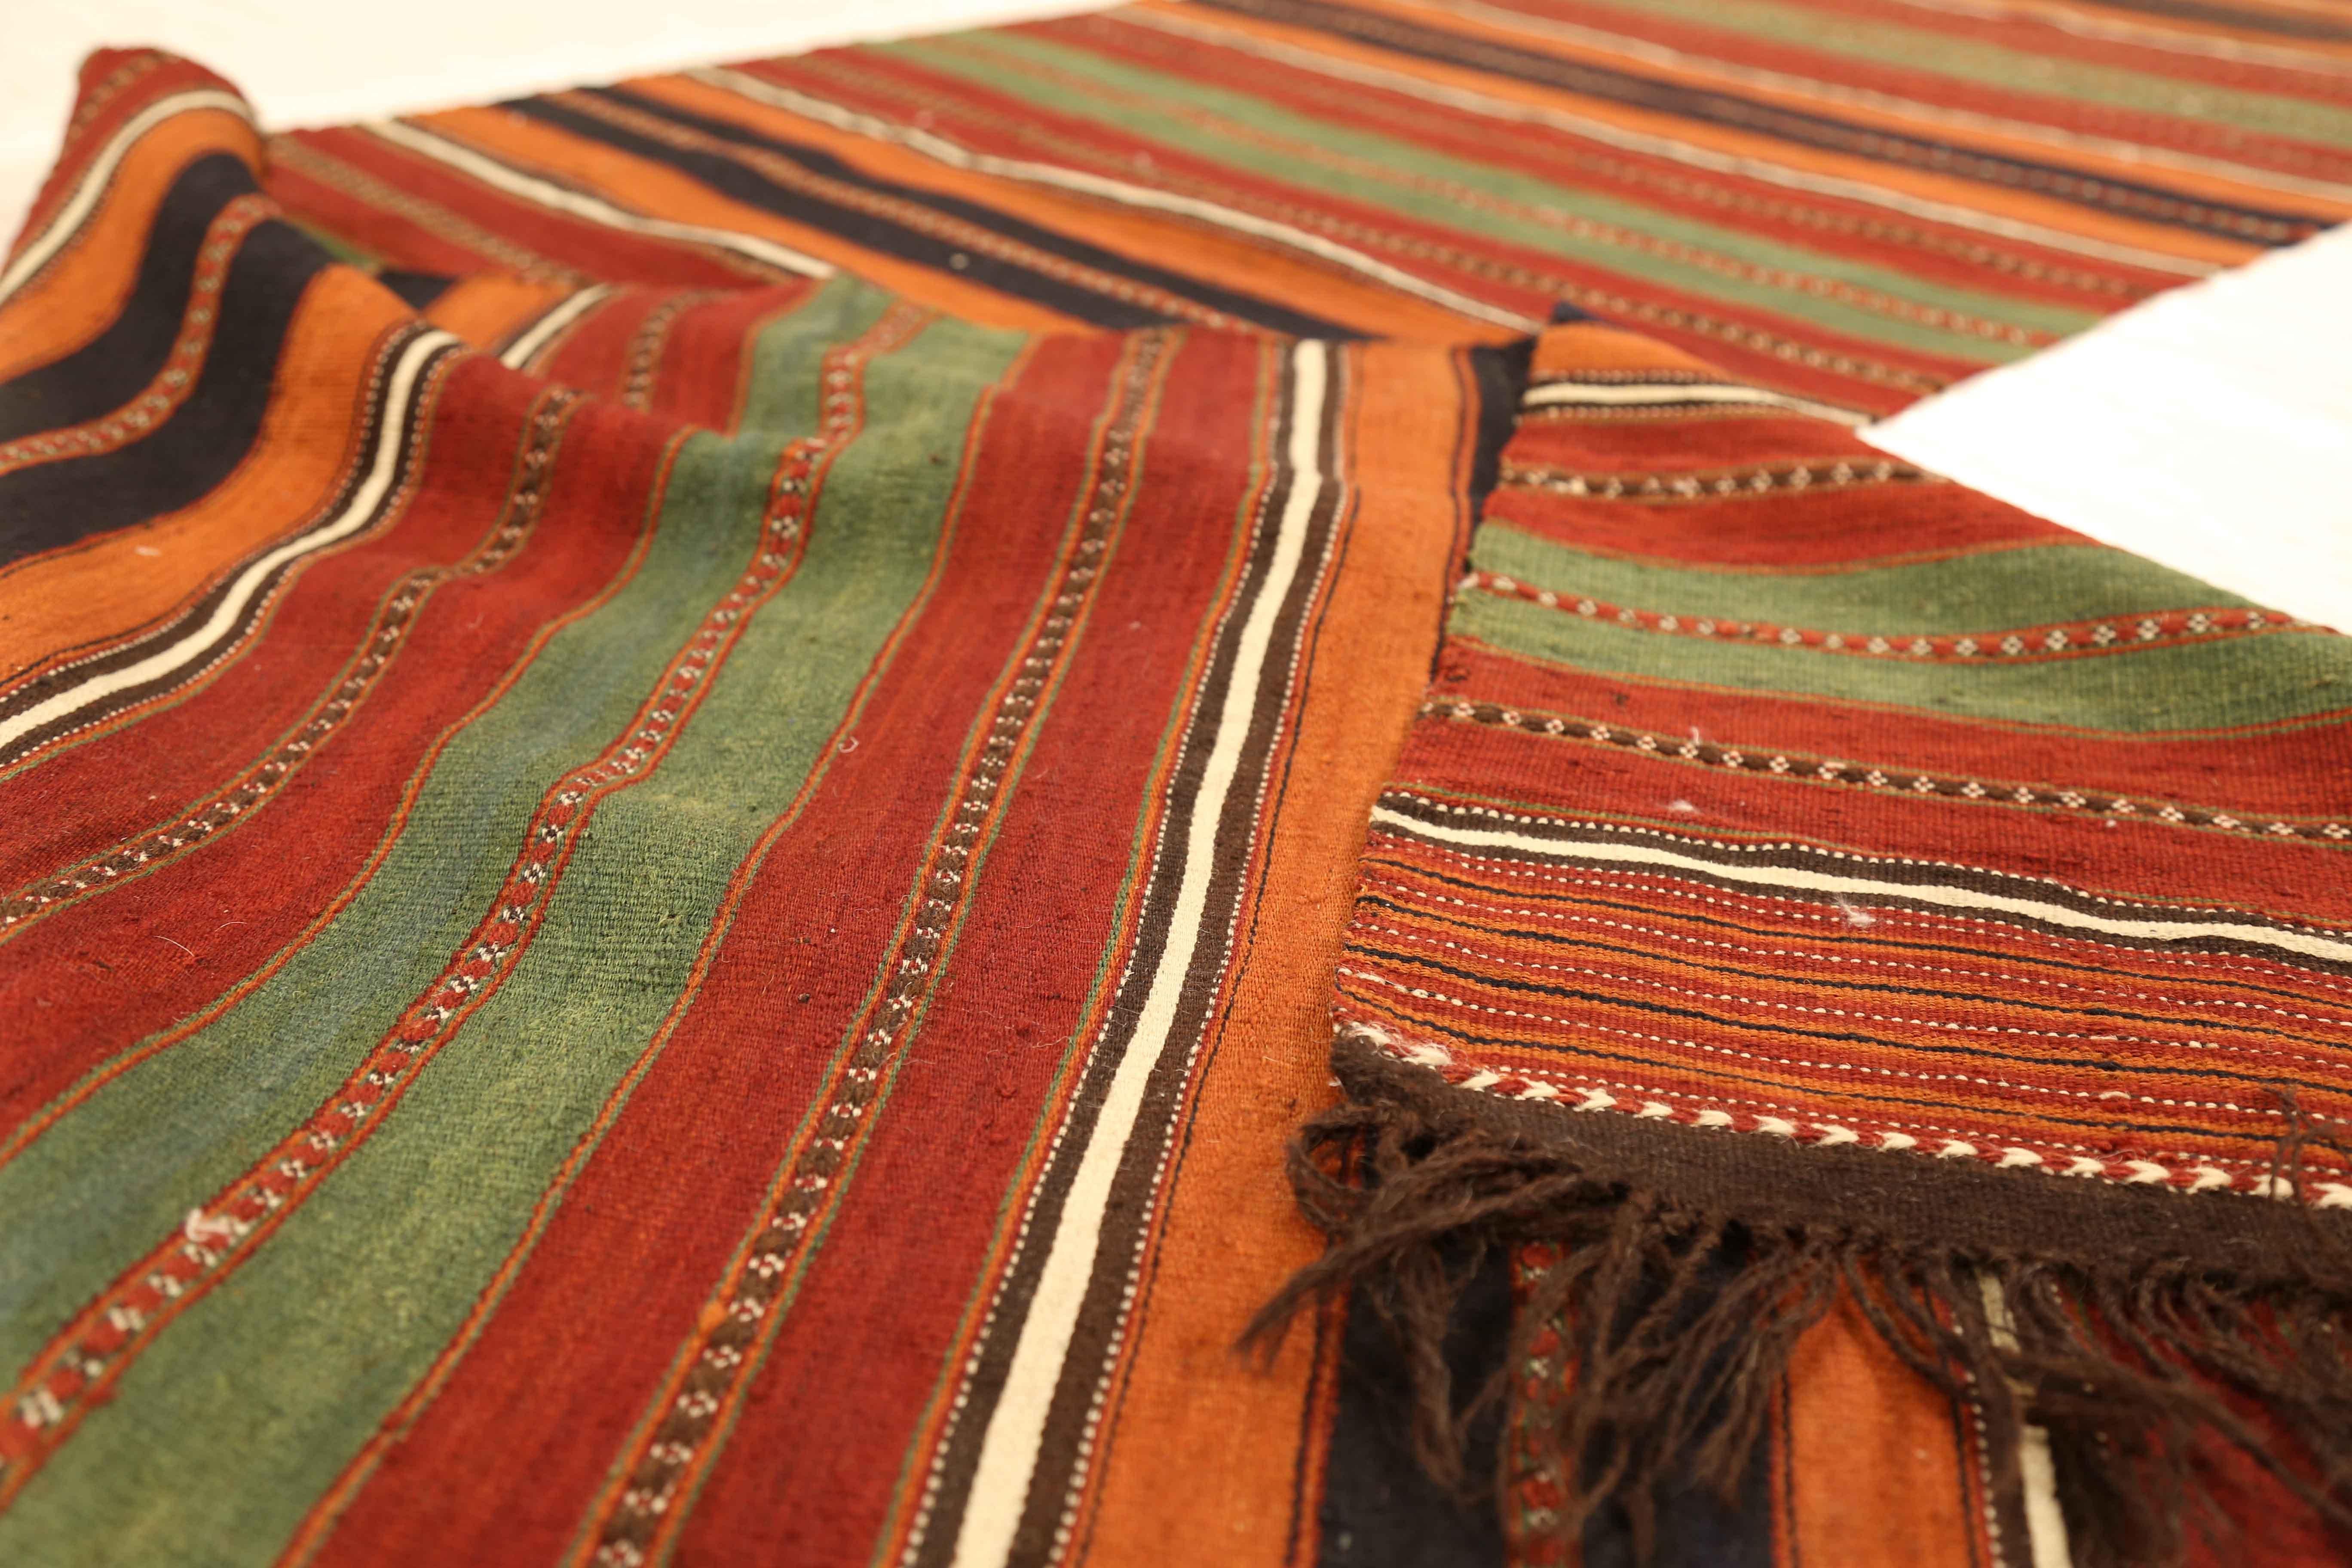 Antique Persian Kilim Runner Rug with Colored Stripes on Red/Brown Field In Excellent Condition For Sale In Dallas, TX